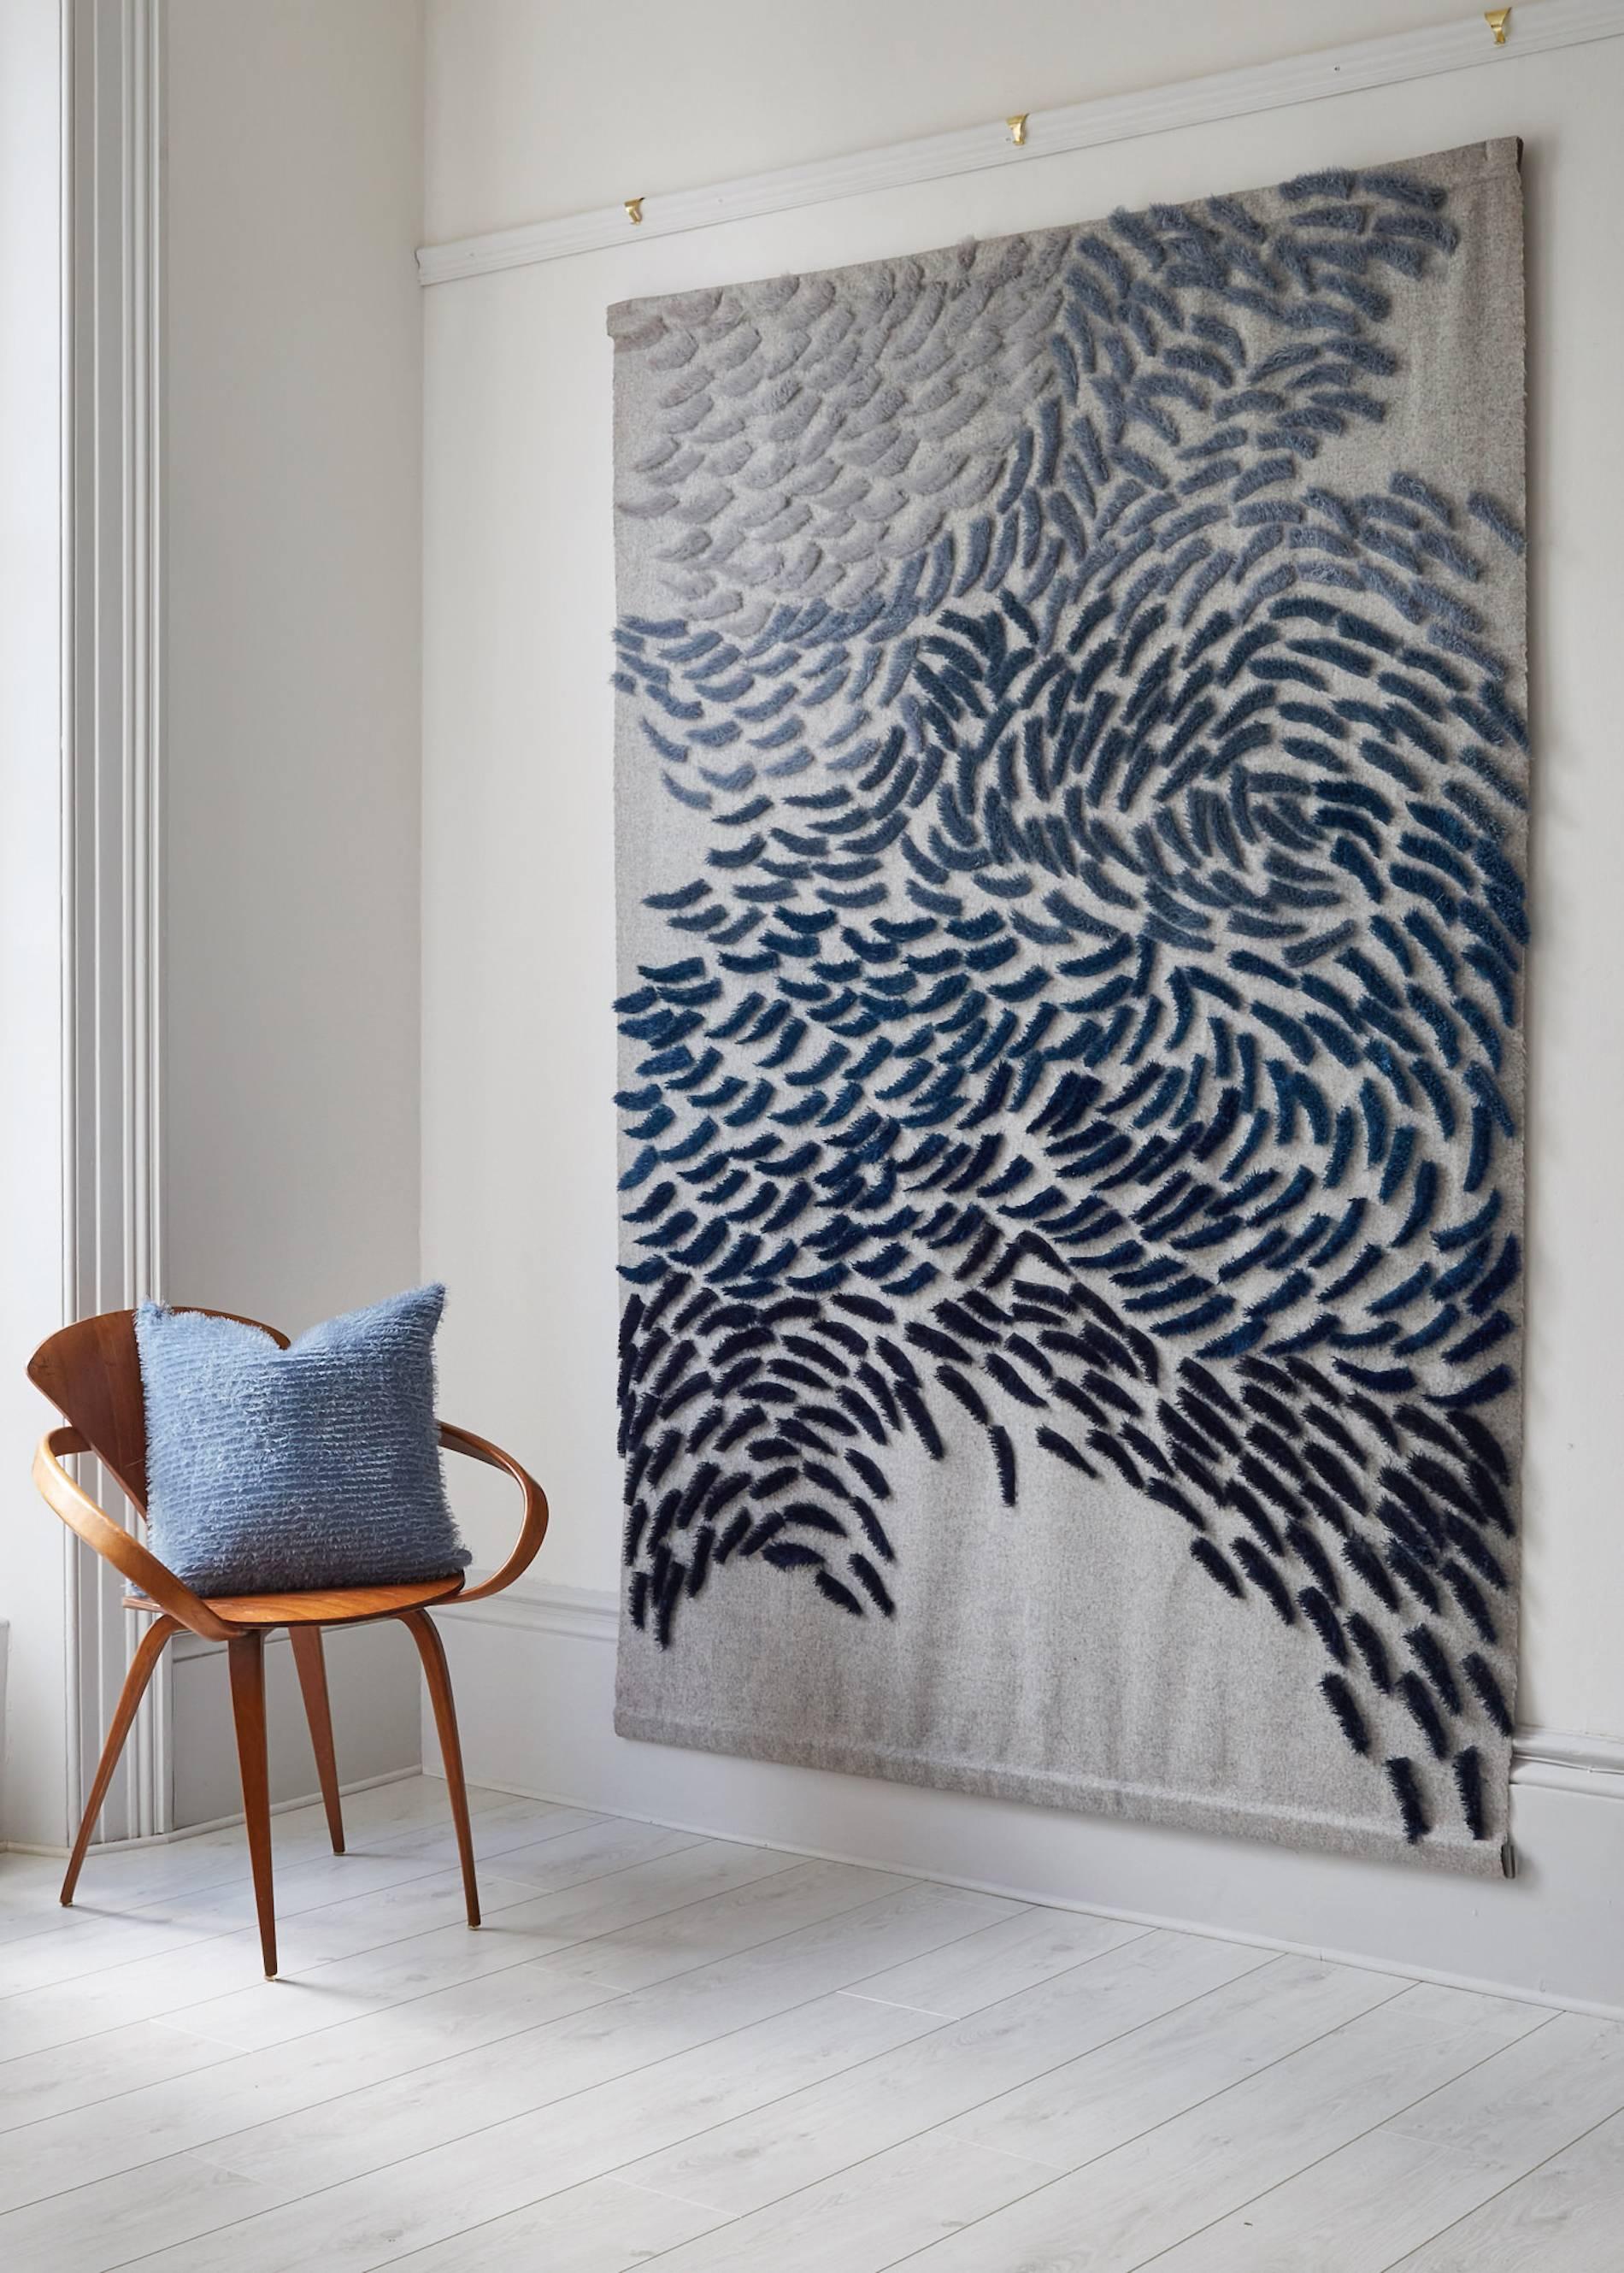 Anna Gravelle is a designer with a reputation for creating innovative fabrics and architectural art for private and public spaces. Her designs are developed through exploring traditional and contemporary processes which are realized using printed